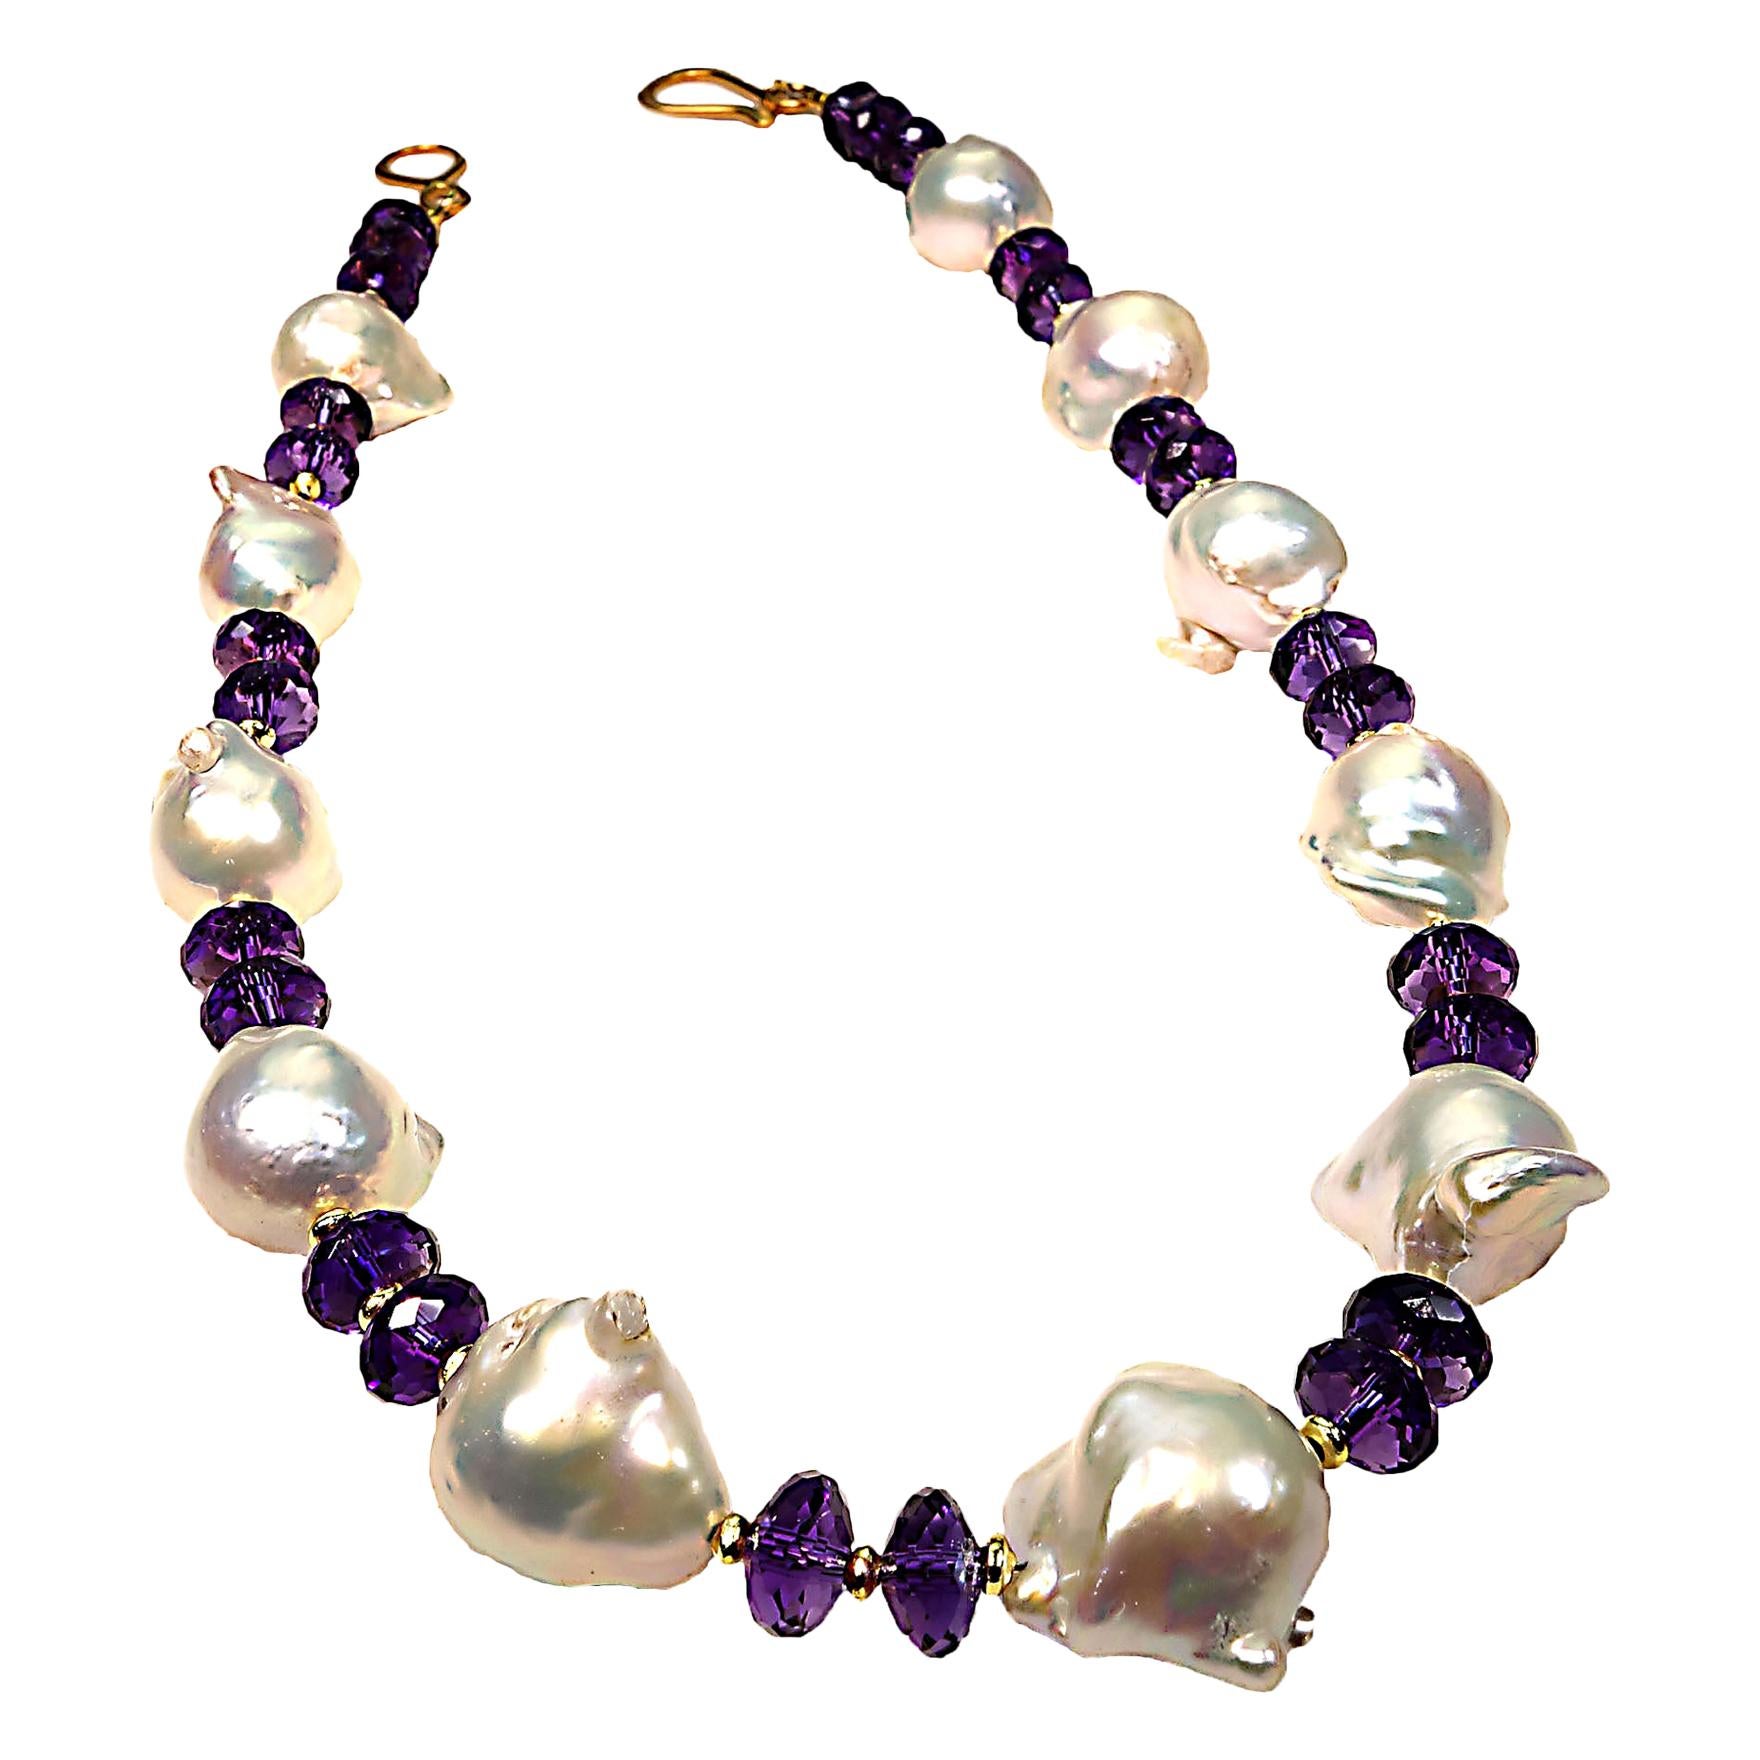 Gemjunky Sophisticated Purple Amethyst and White Baroque Pearl Choker Necklace